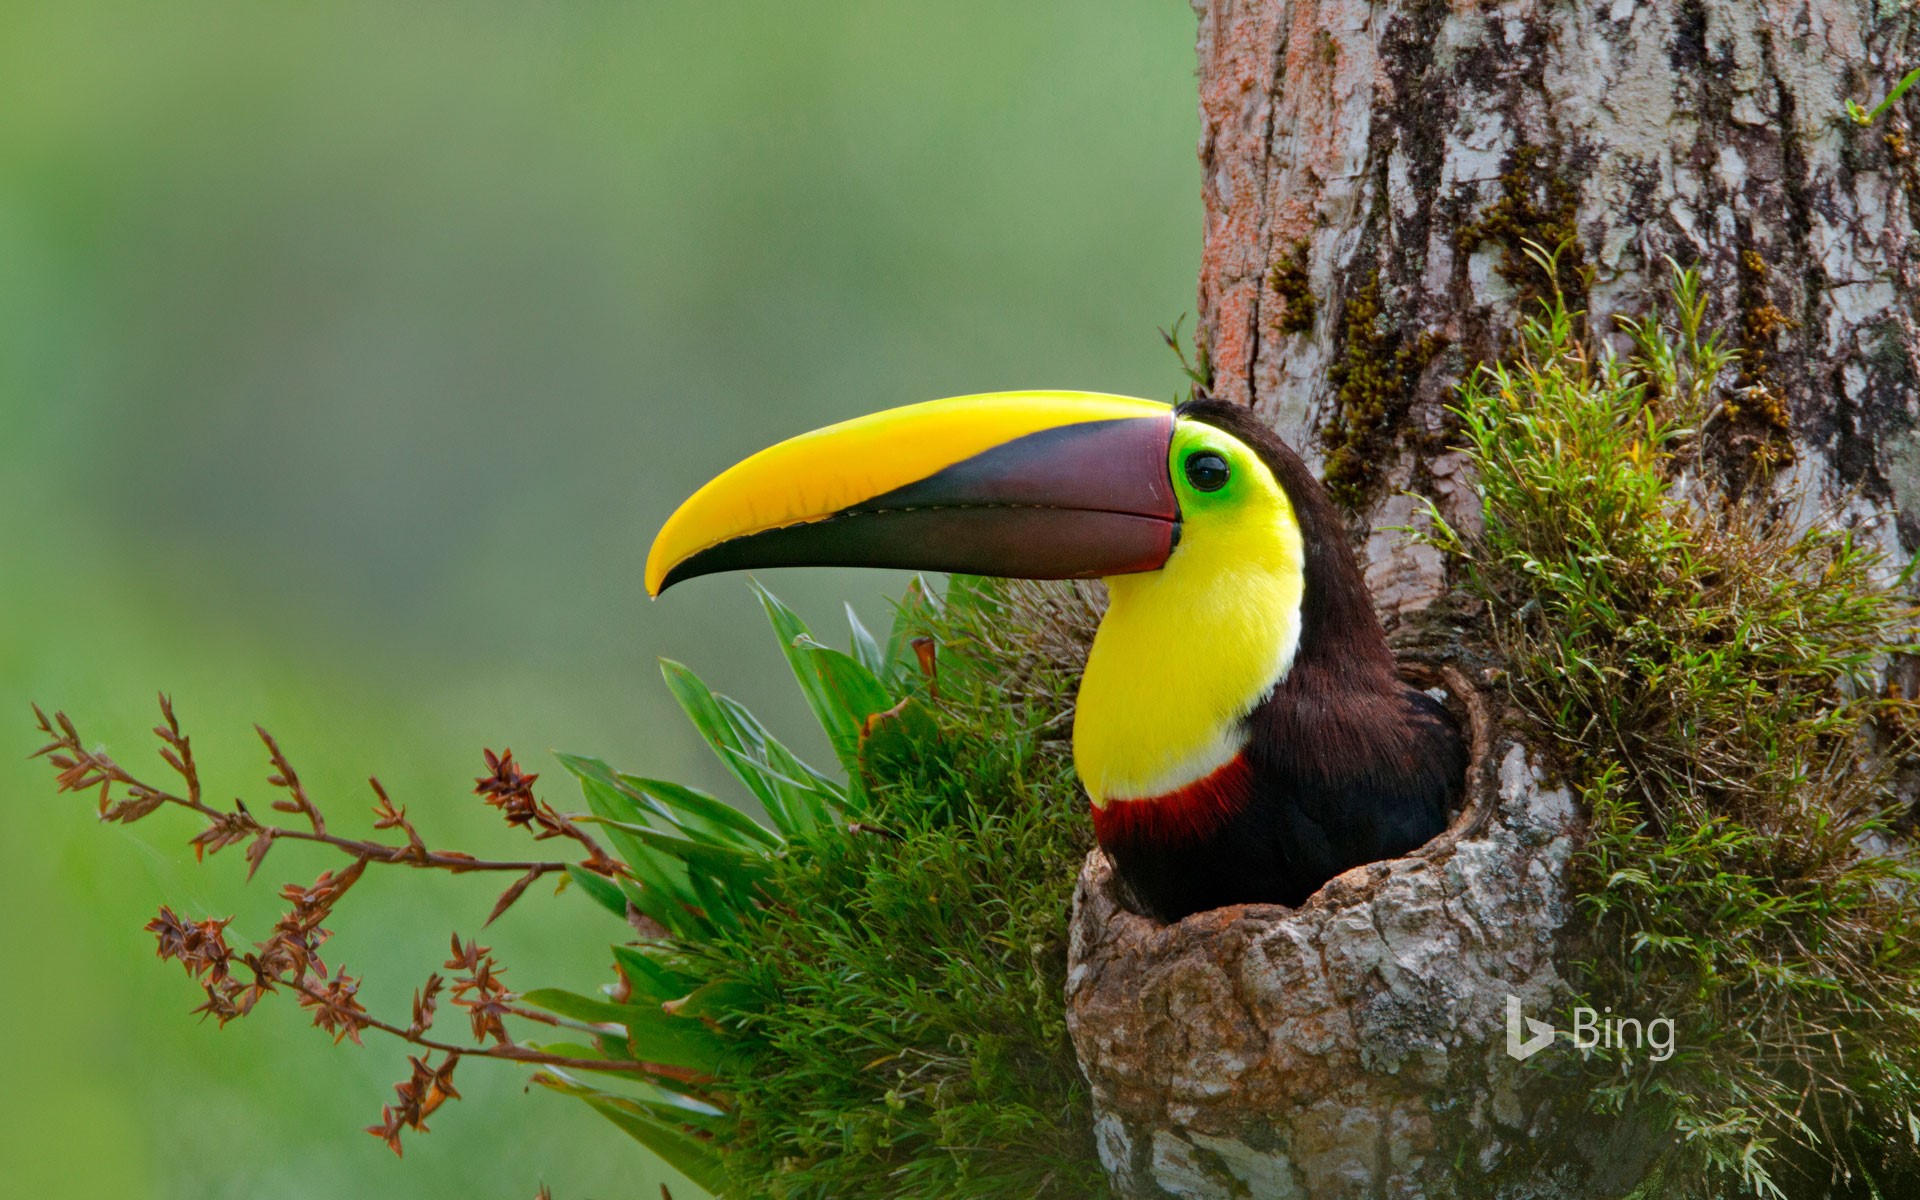 Chestnut-mandibled toucan nesting in the cavity of a tree, Costa Rica